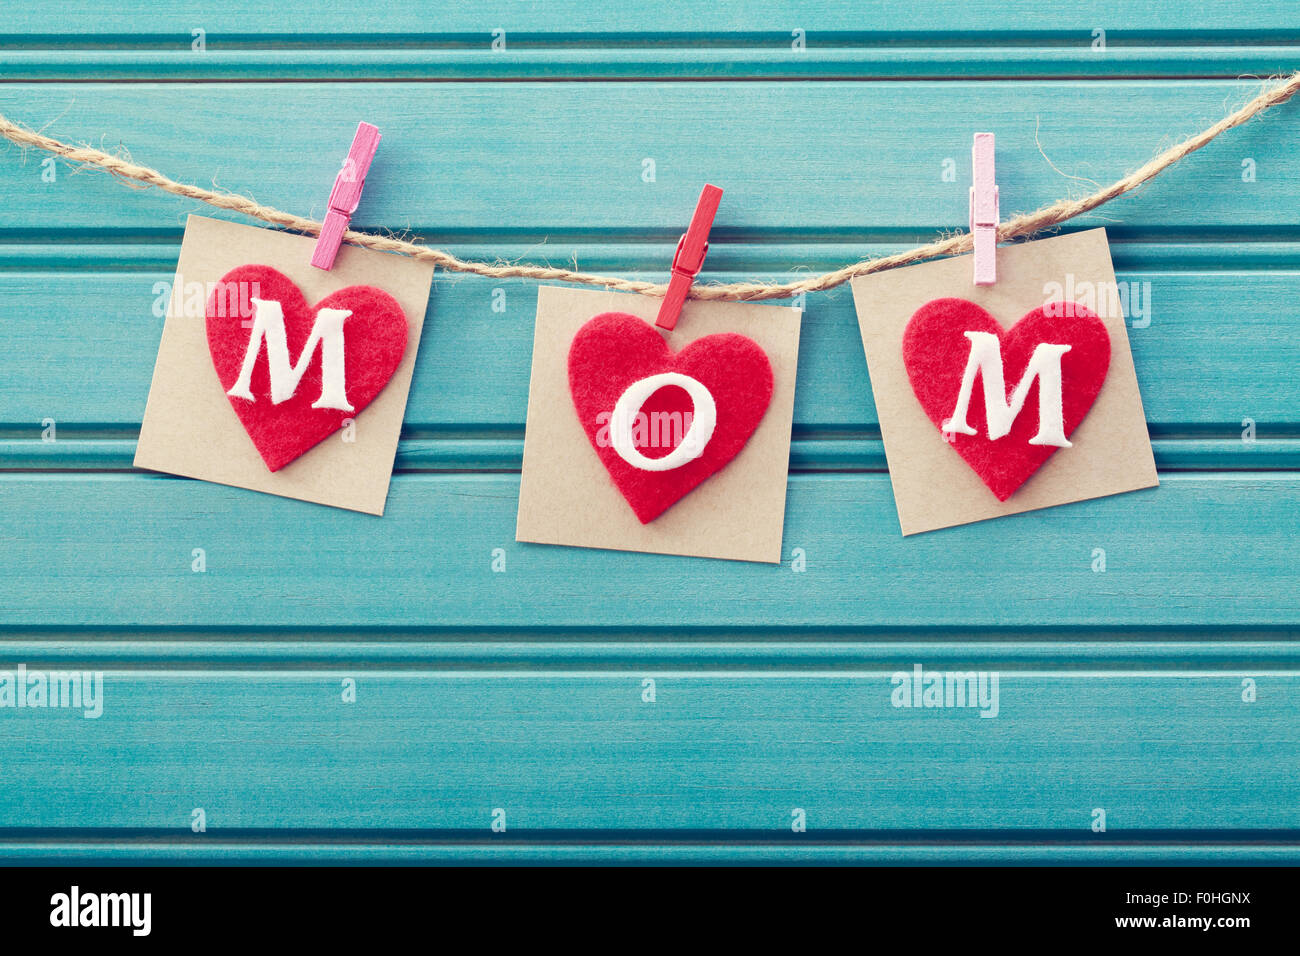 Mothers day message on felt hearts over blue wooden board Stock Photo